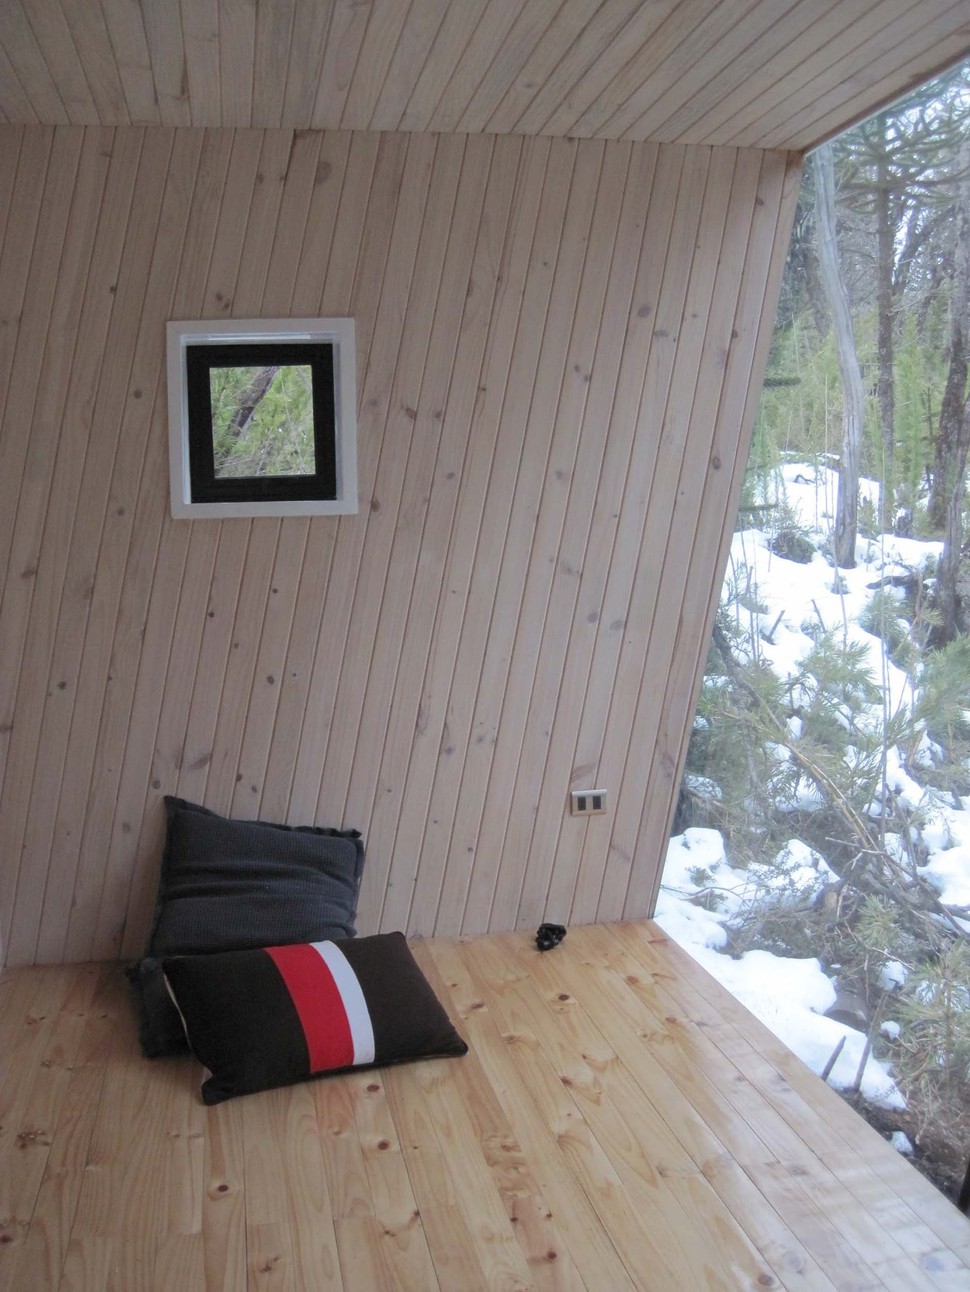 winter-cabin-accessed-elevated-walkway-10-pillows.jpg